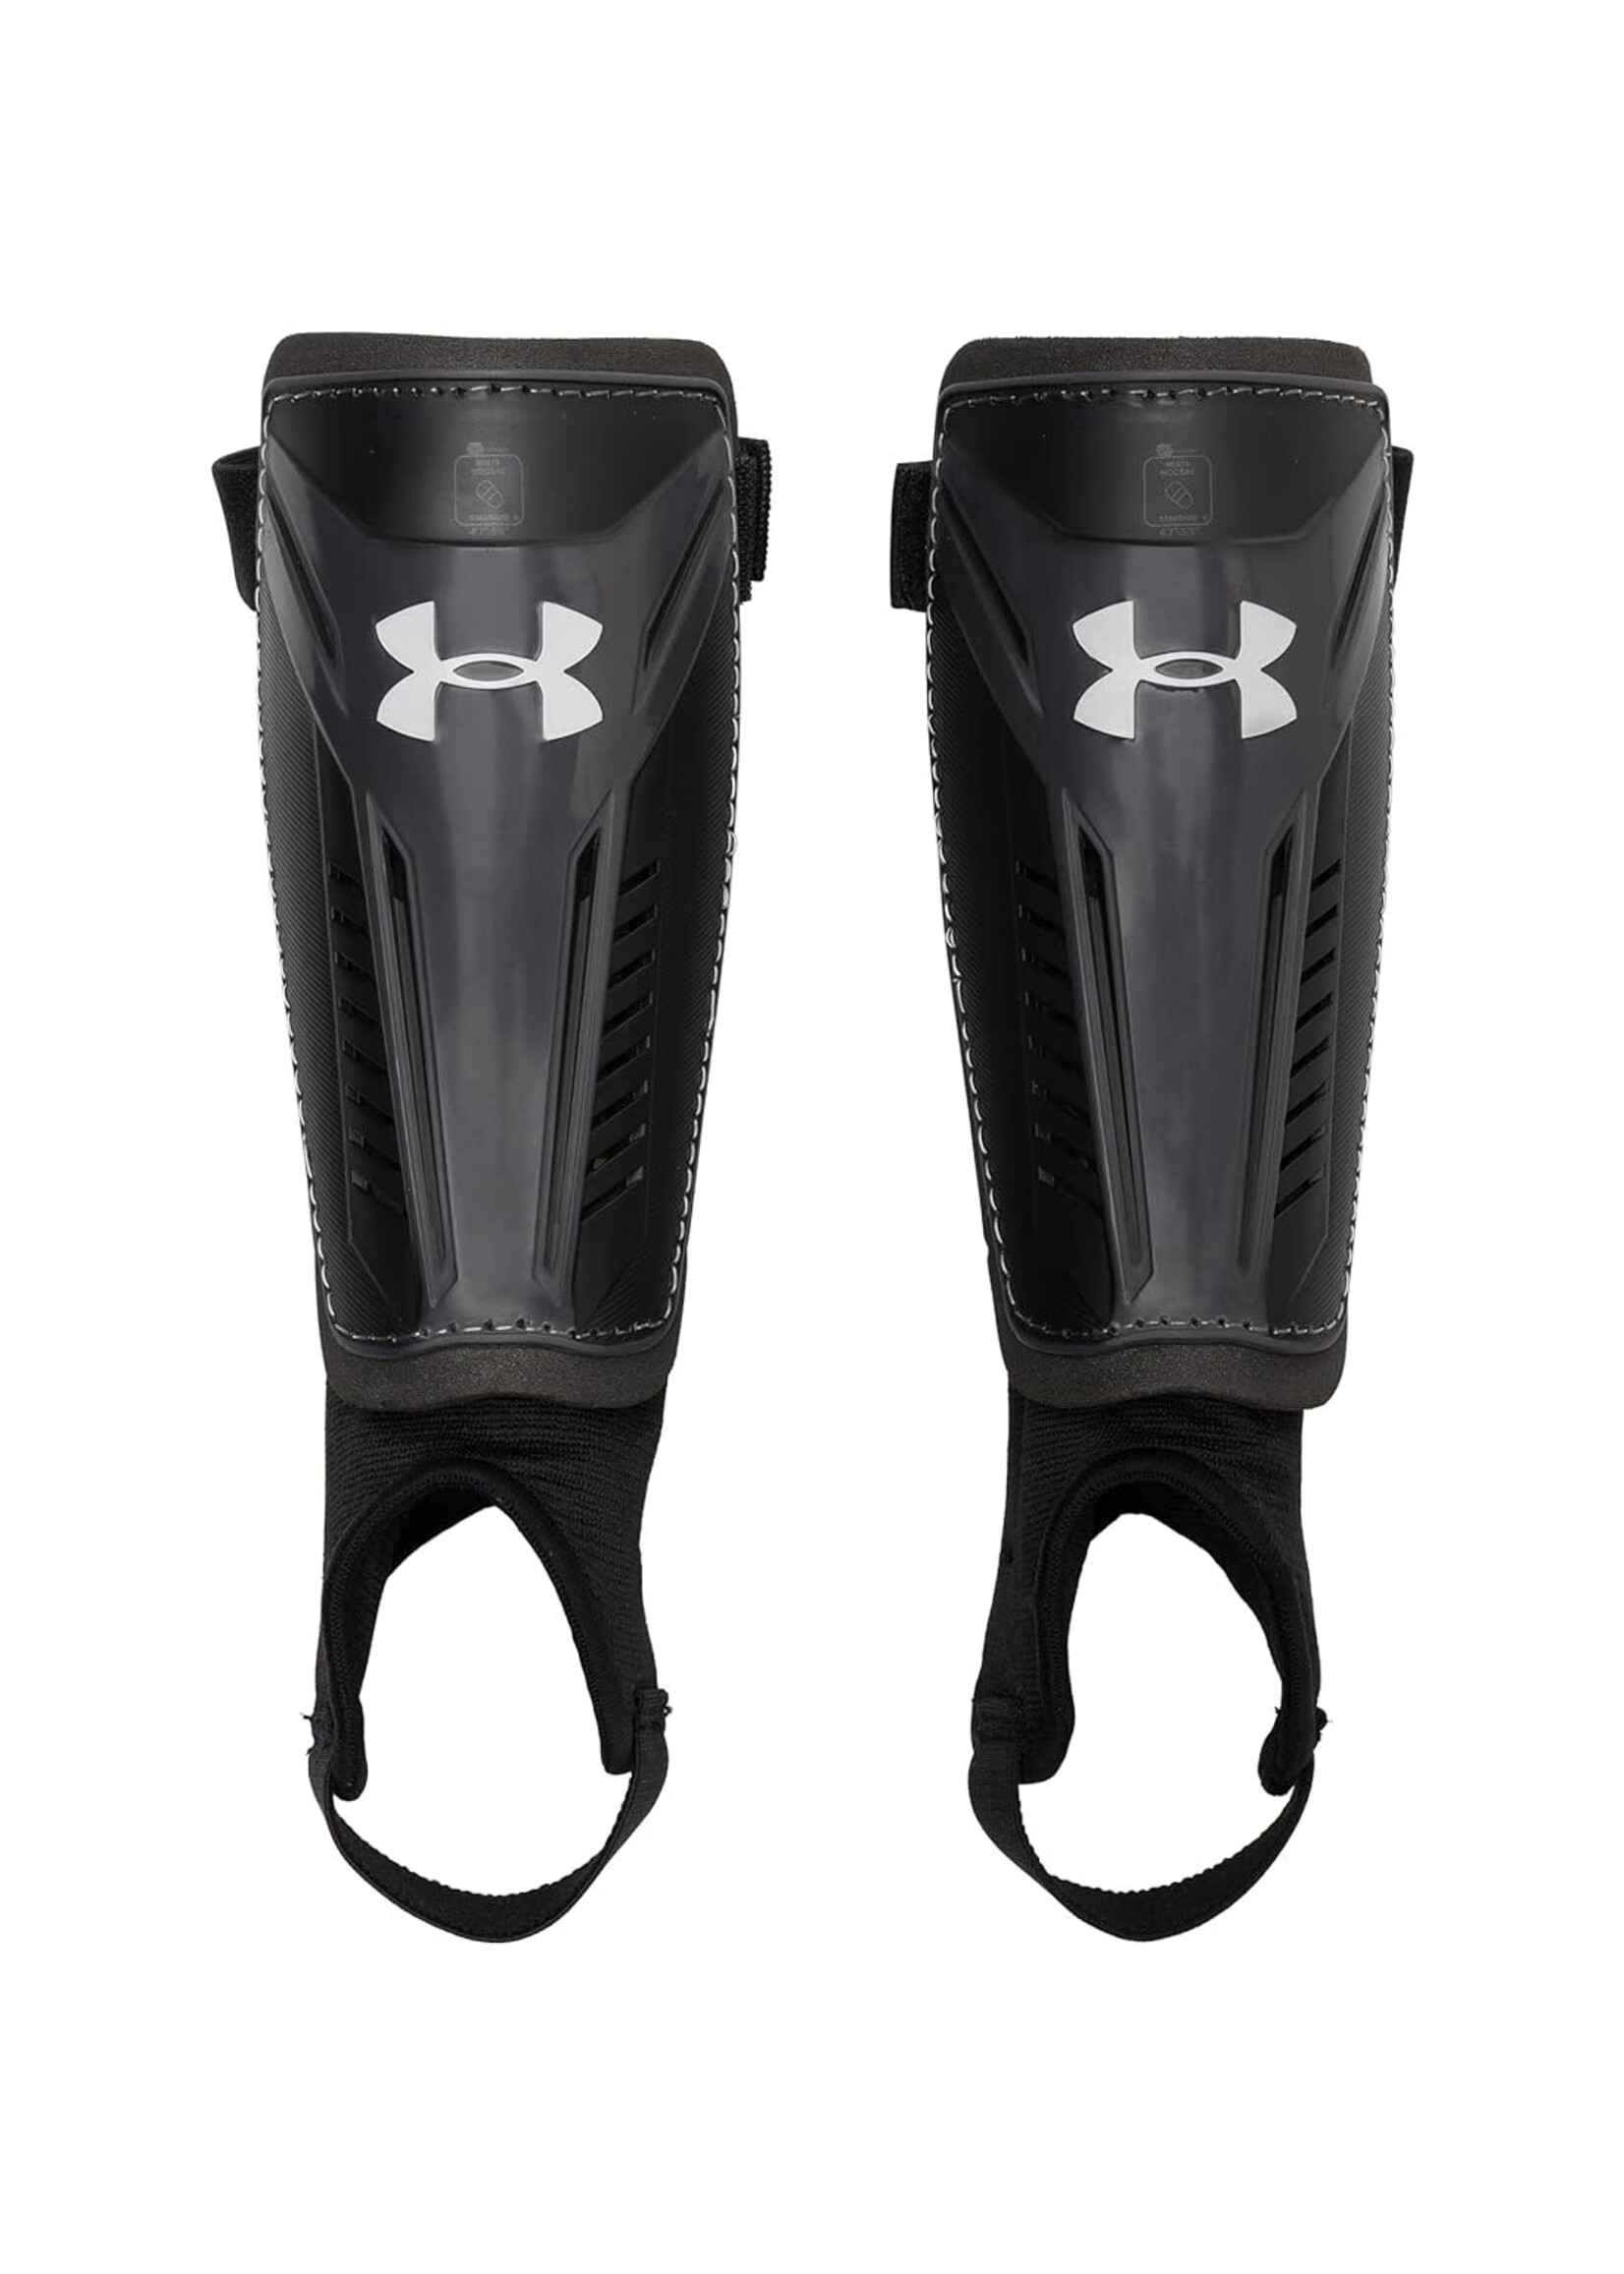 Under Armour UNDER ARMOUR PROTECTION TIBIA CHALLENGE YOUTH